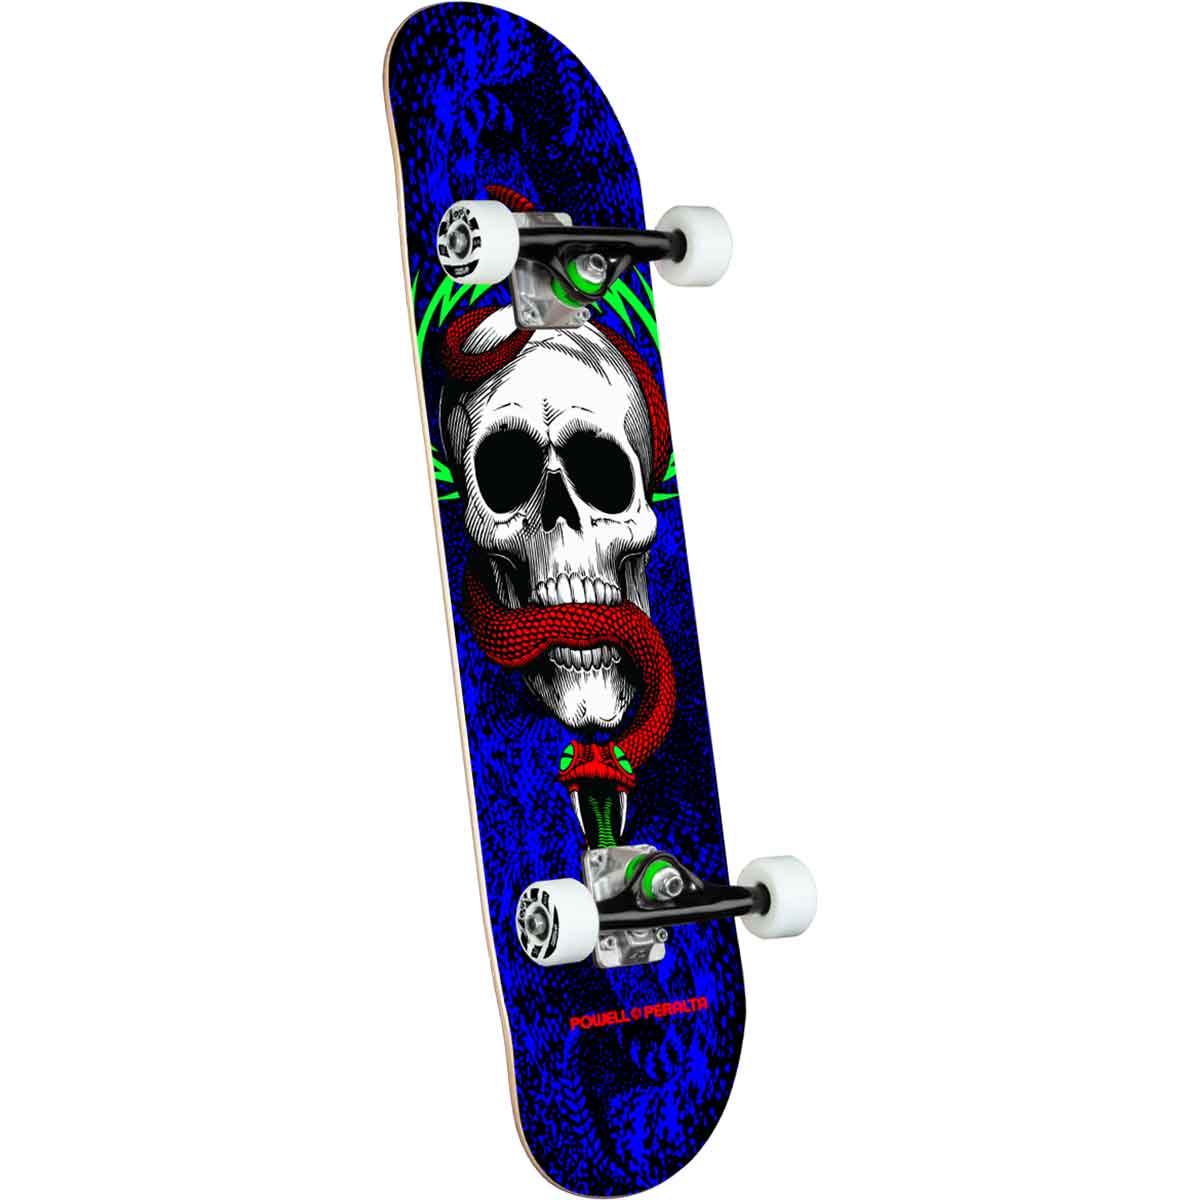 POWELL PERALTA SKULL & SNAKE ONE OFF 7.75 COMPLETE POWELL PERALTA